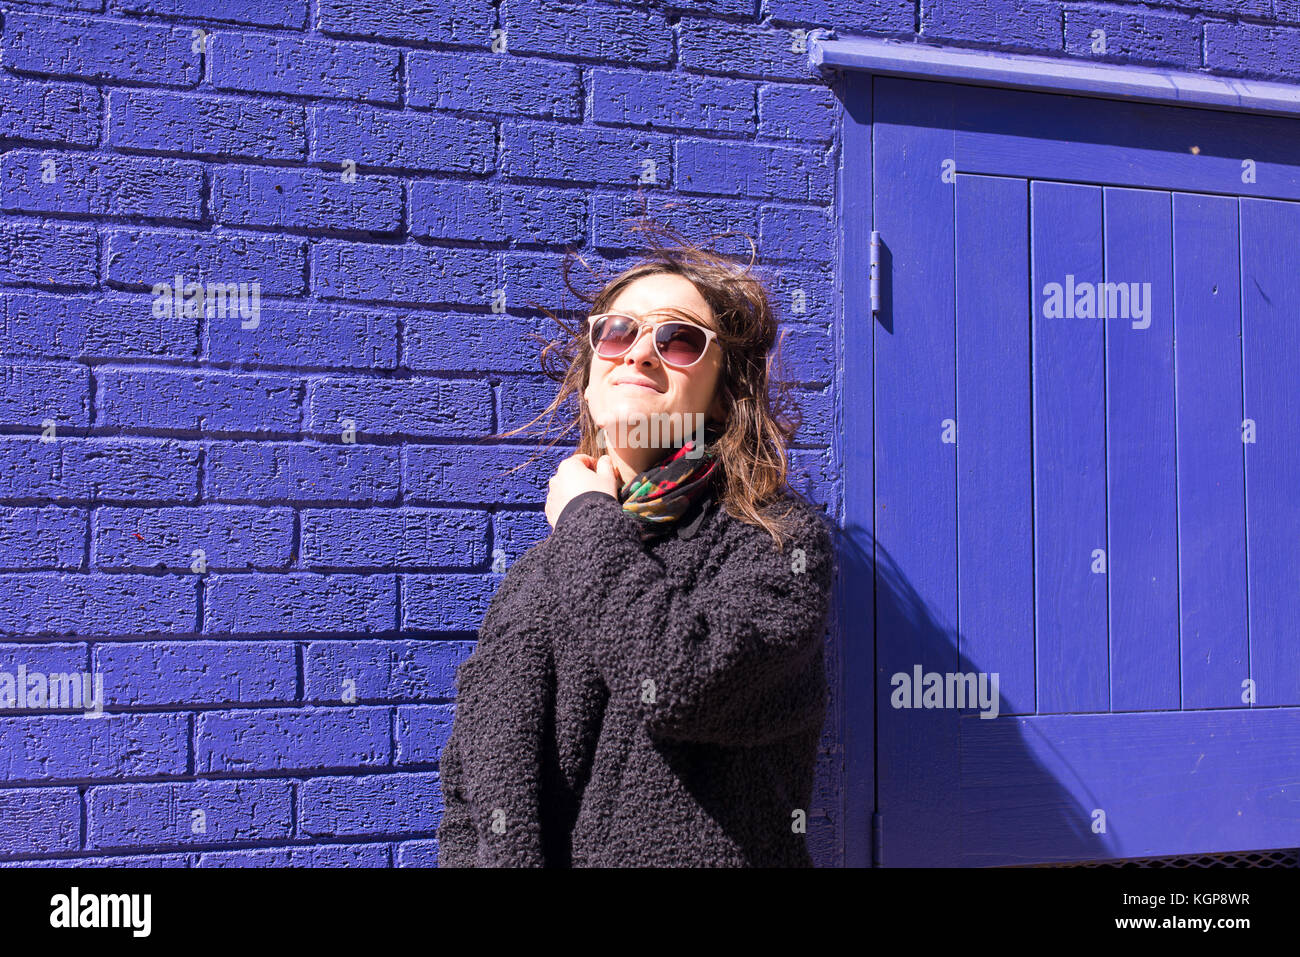 A woman wearing sunglasses standing in front of a wall photo